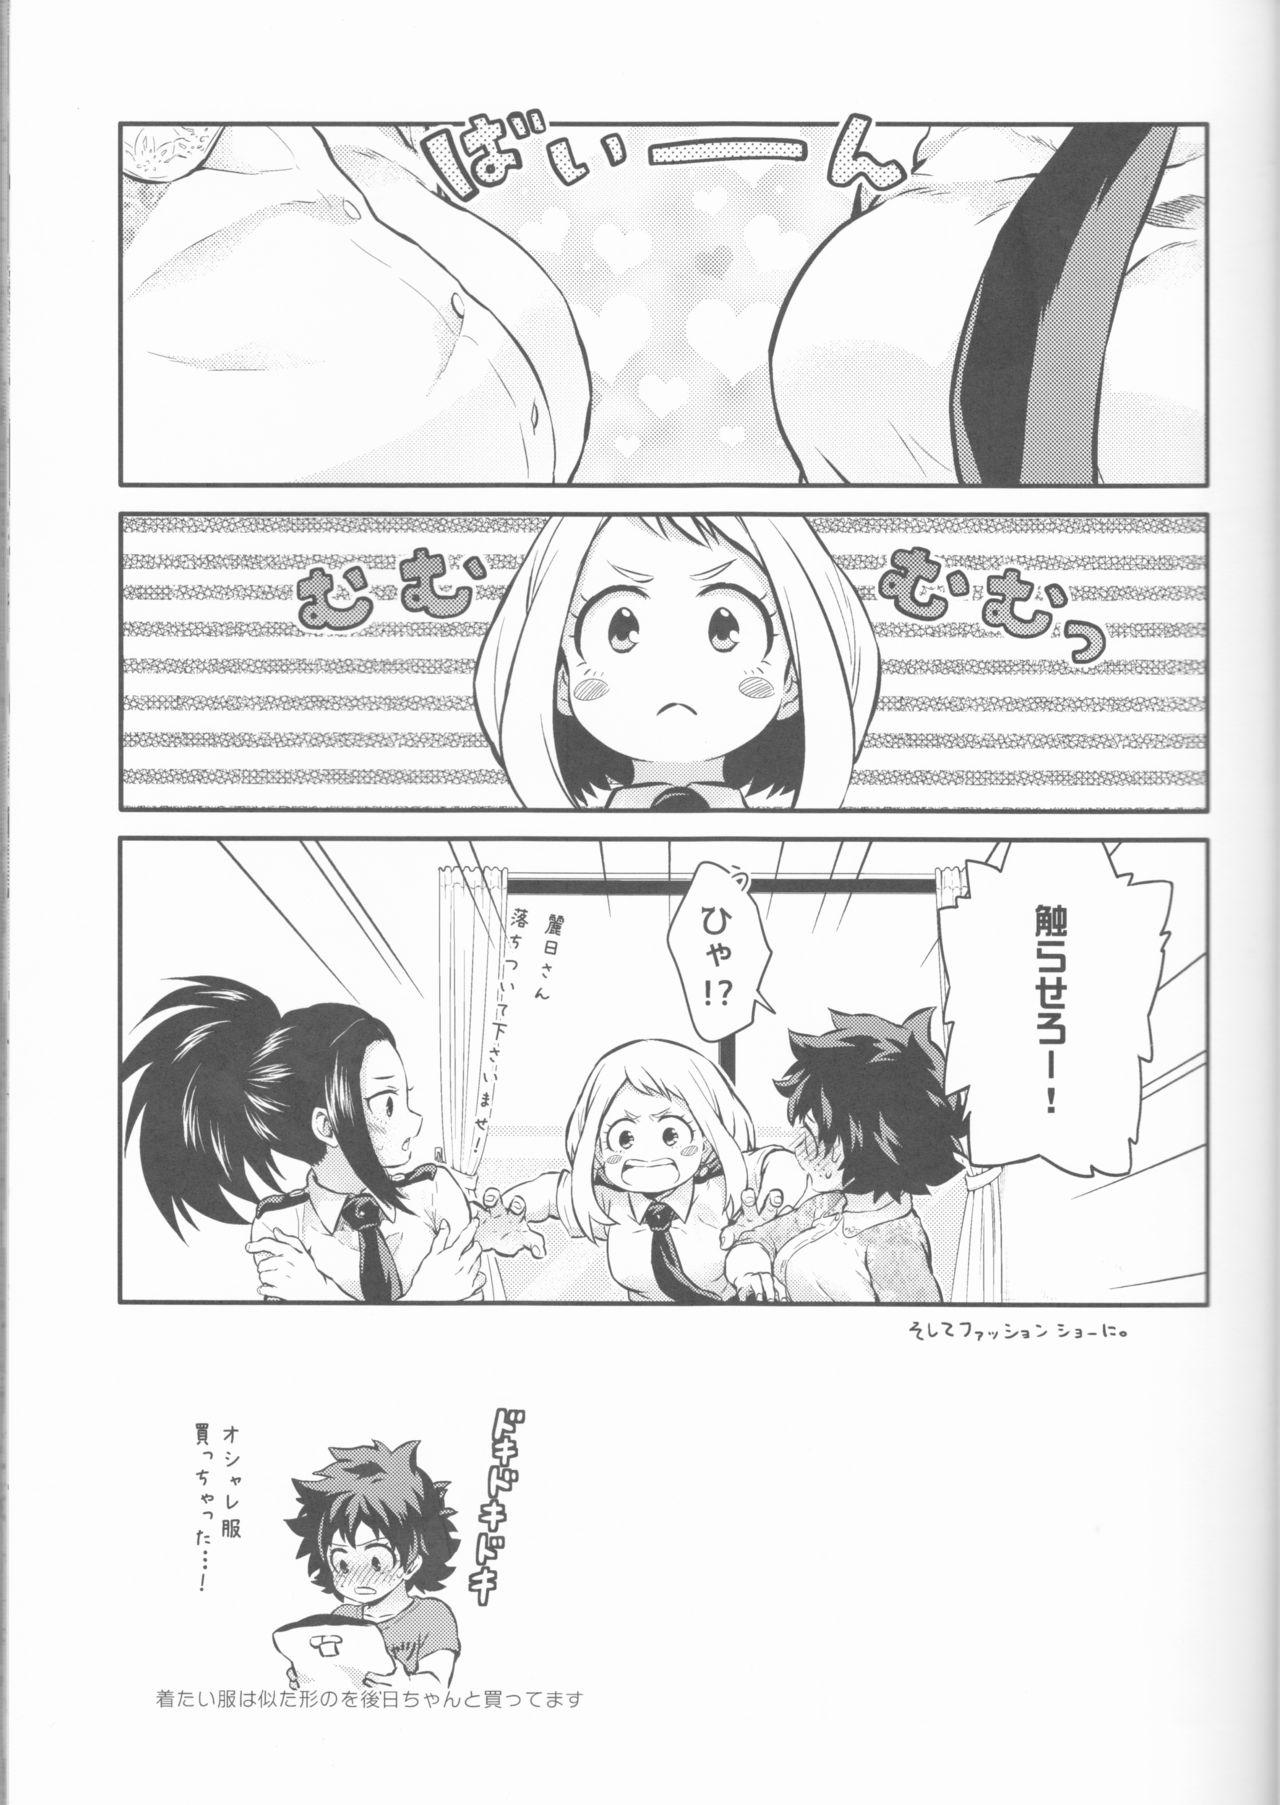 Full Movie Love Me Tender another story - My hero academia Dominant - Page 7